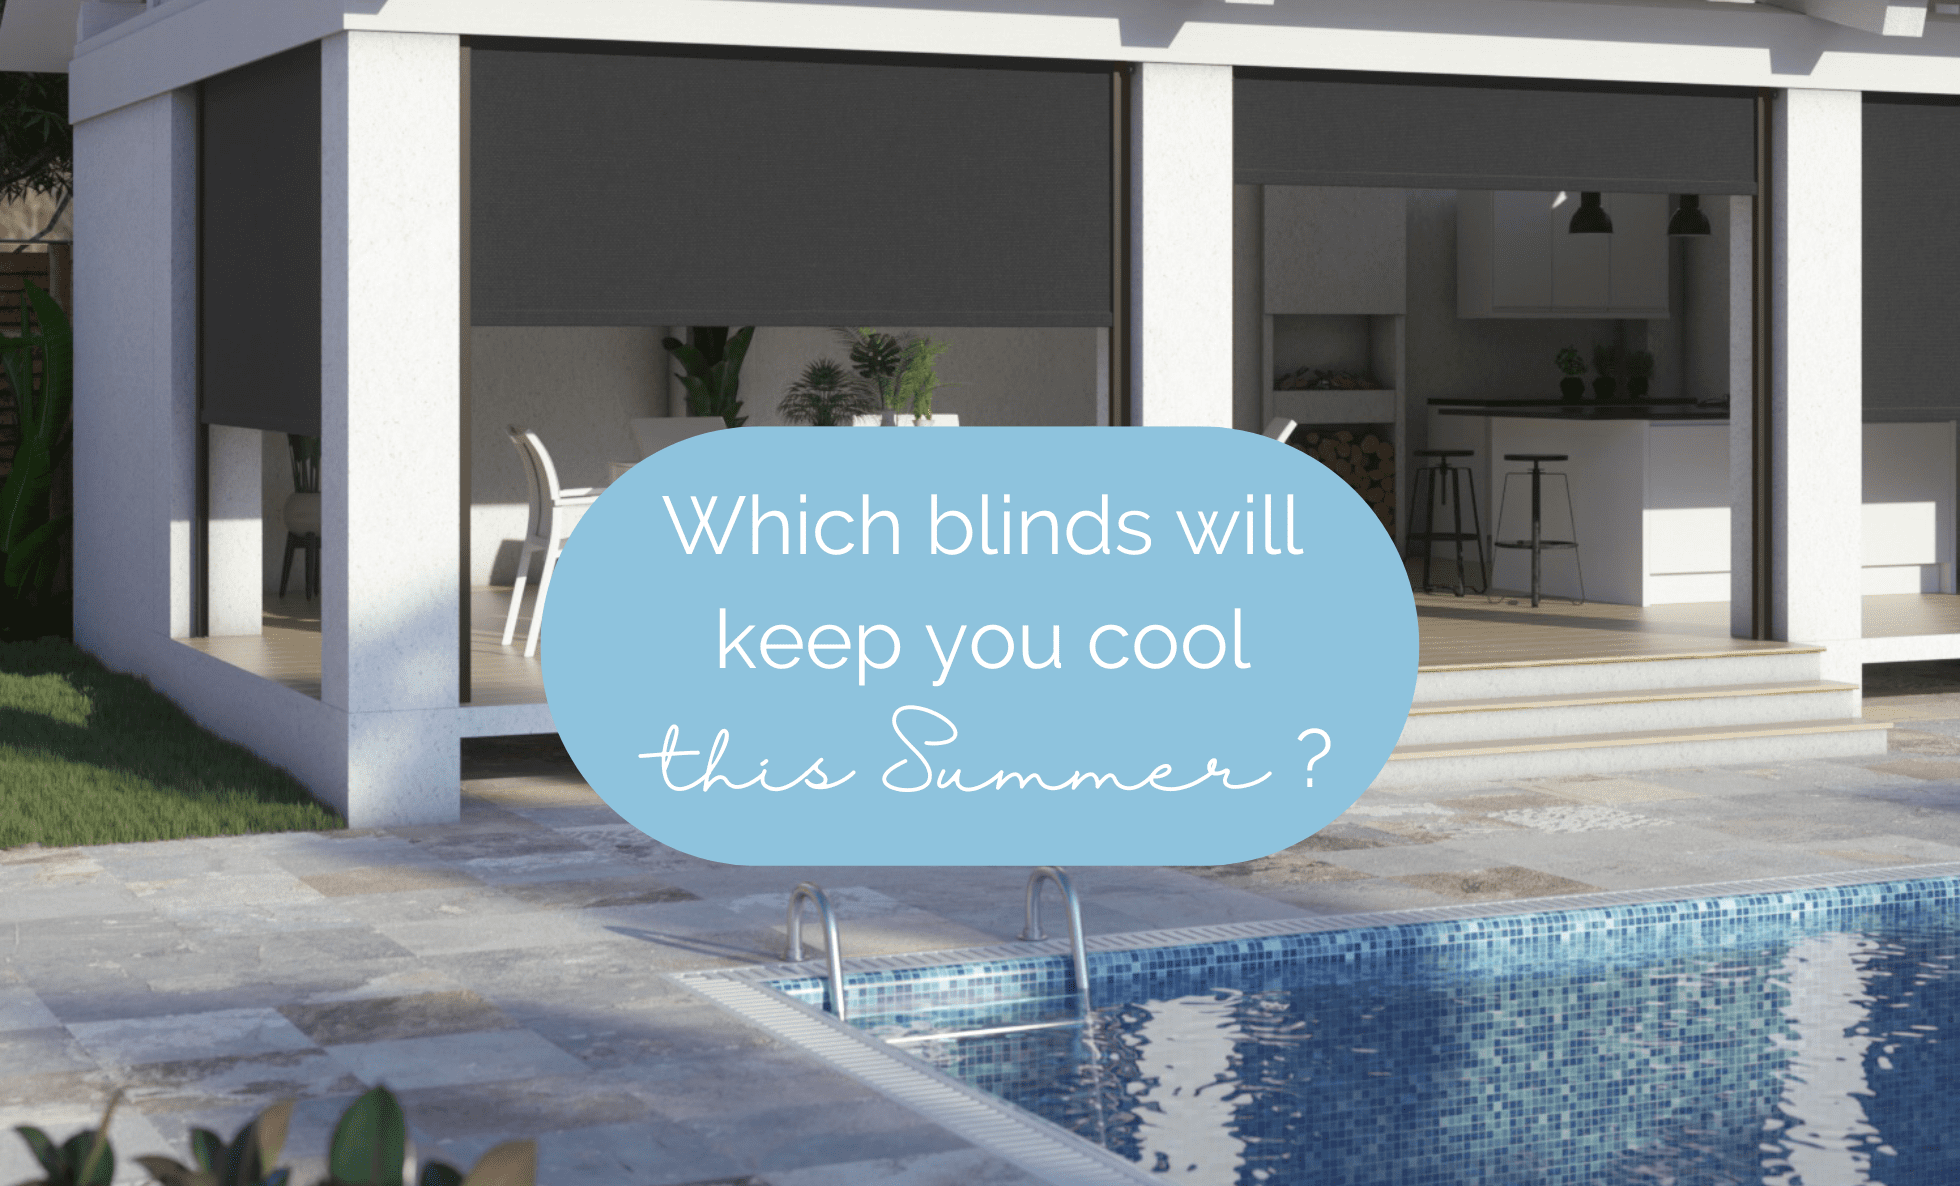 Image shows outdoor blinds protecting an alfresco area near a pool